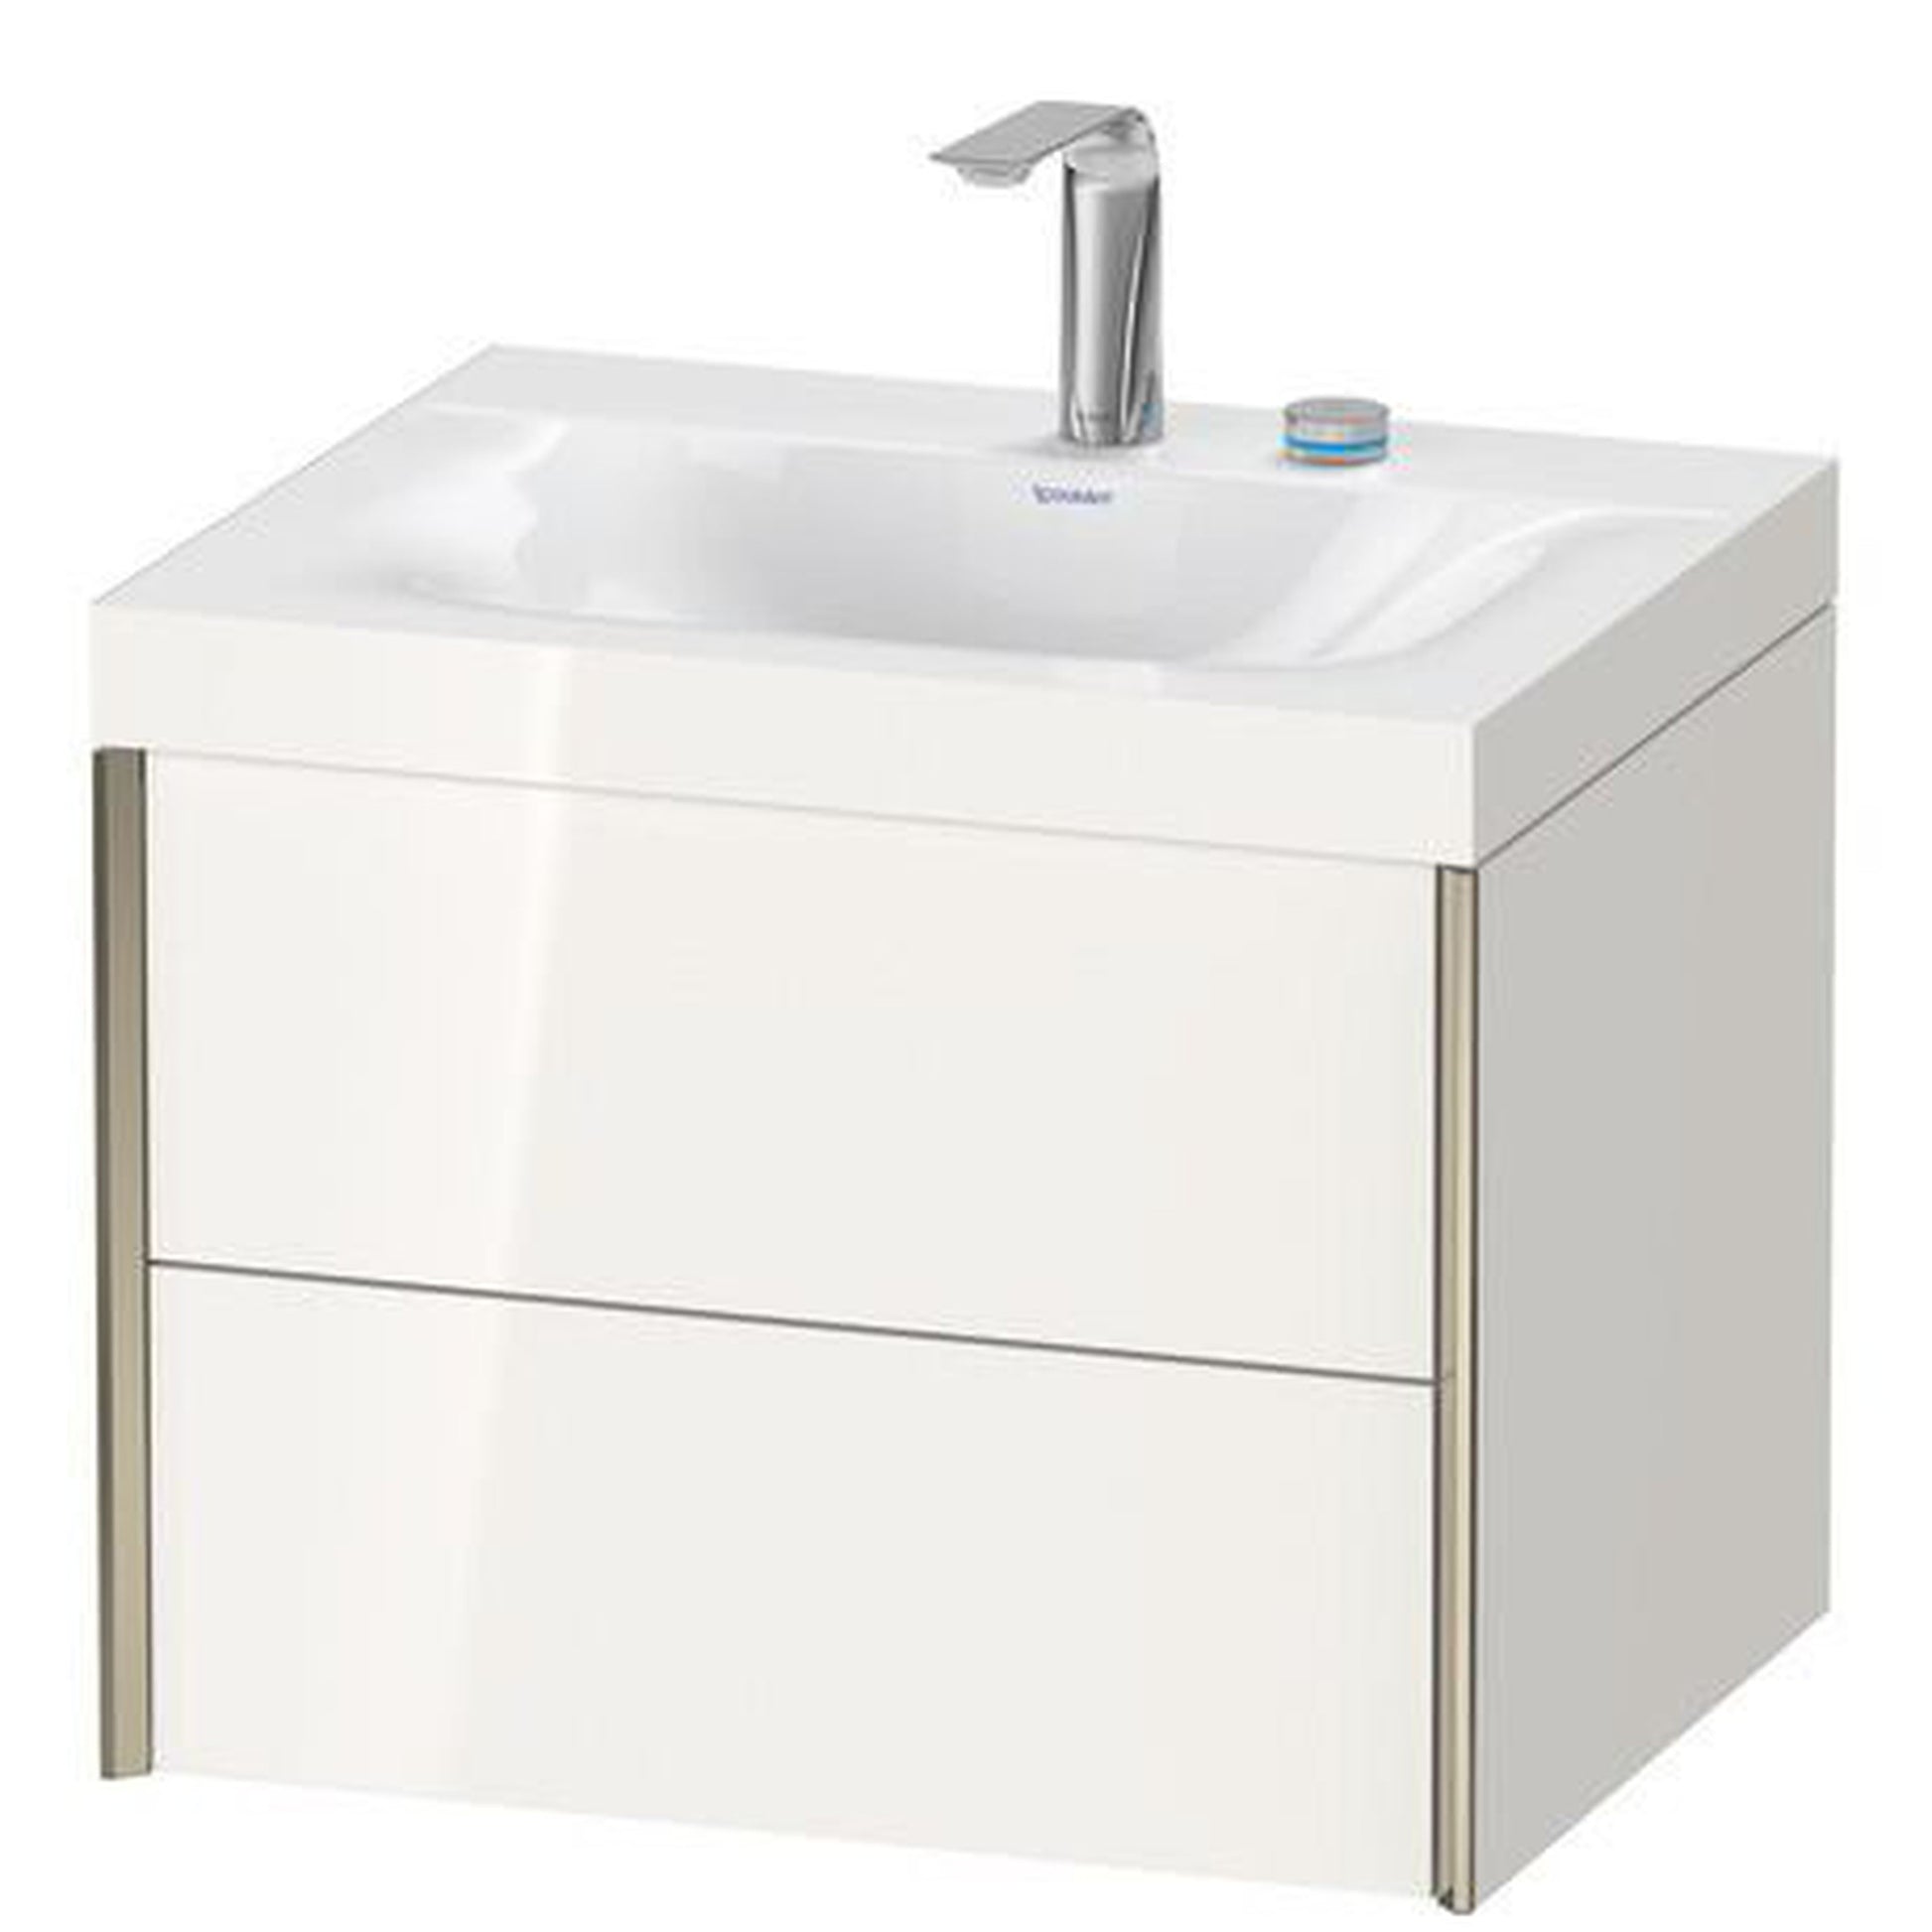 Duravit Xviu 24" x 20" x 19" Two Drawer C-Bonded Wall-Mount Vanity Kit With Two Tap Holes, White (XV4614EB122C)